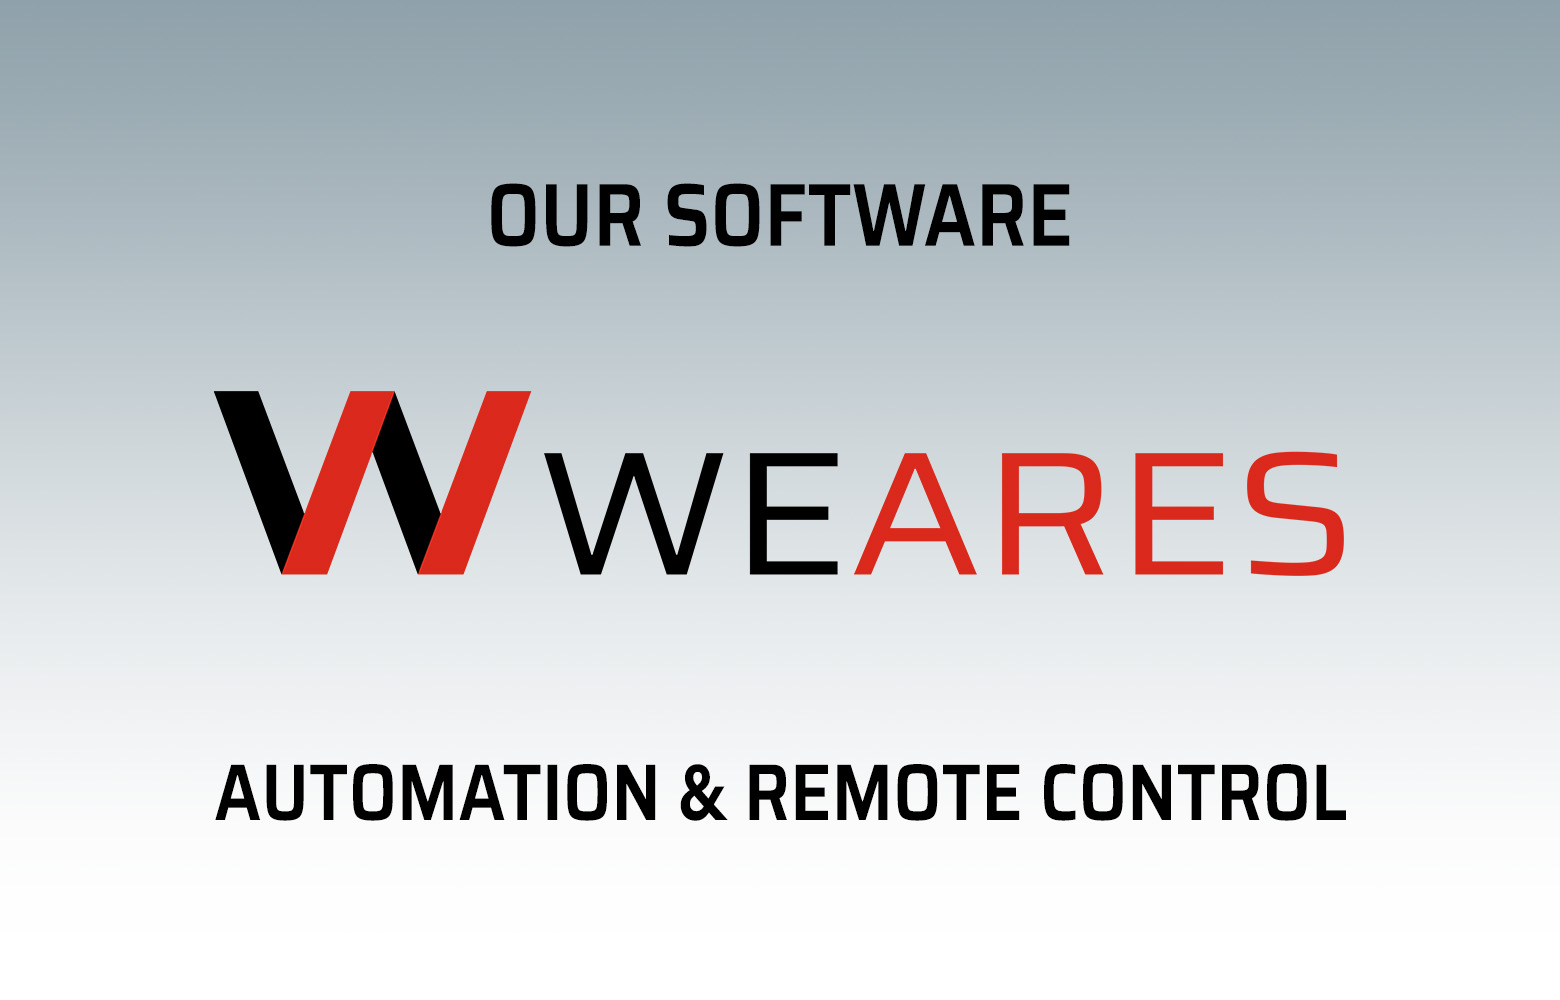 WEARES: our automation and remote control software for industrial centrifuges